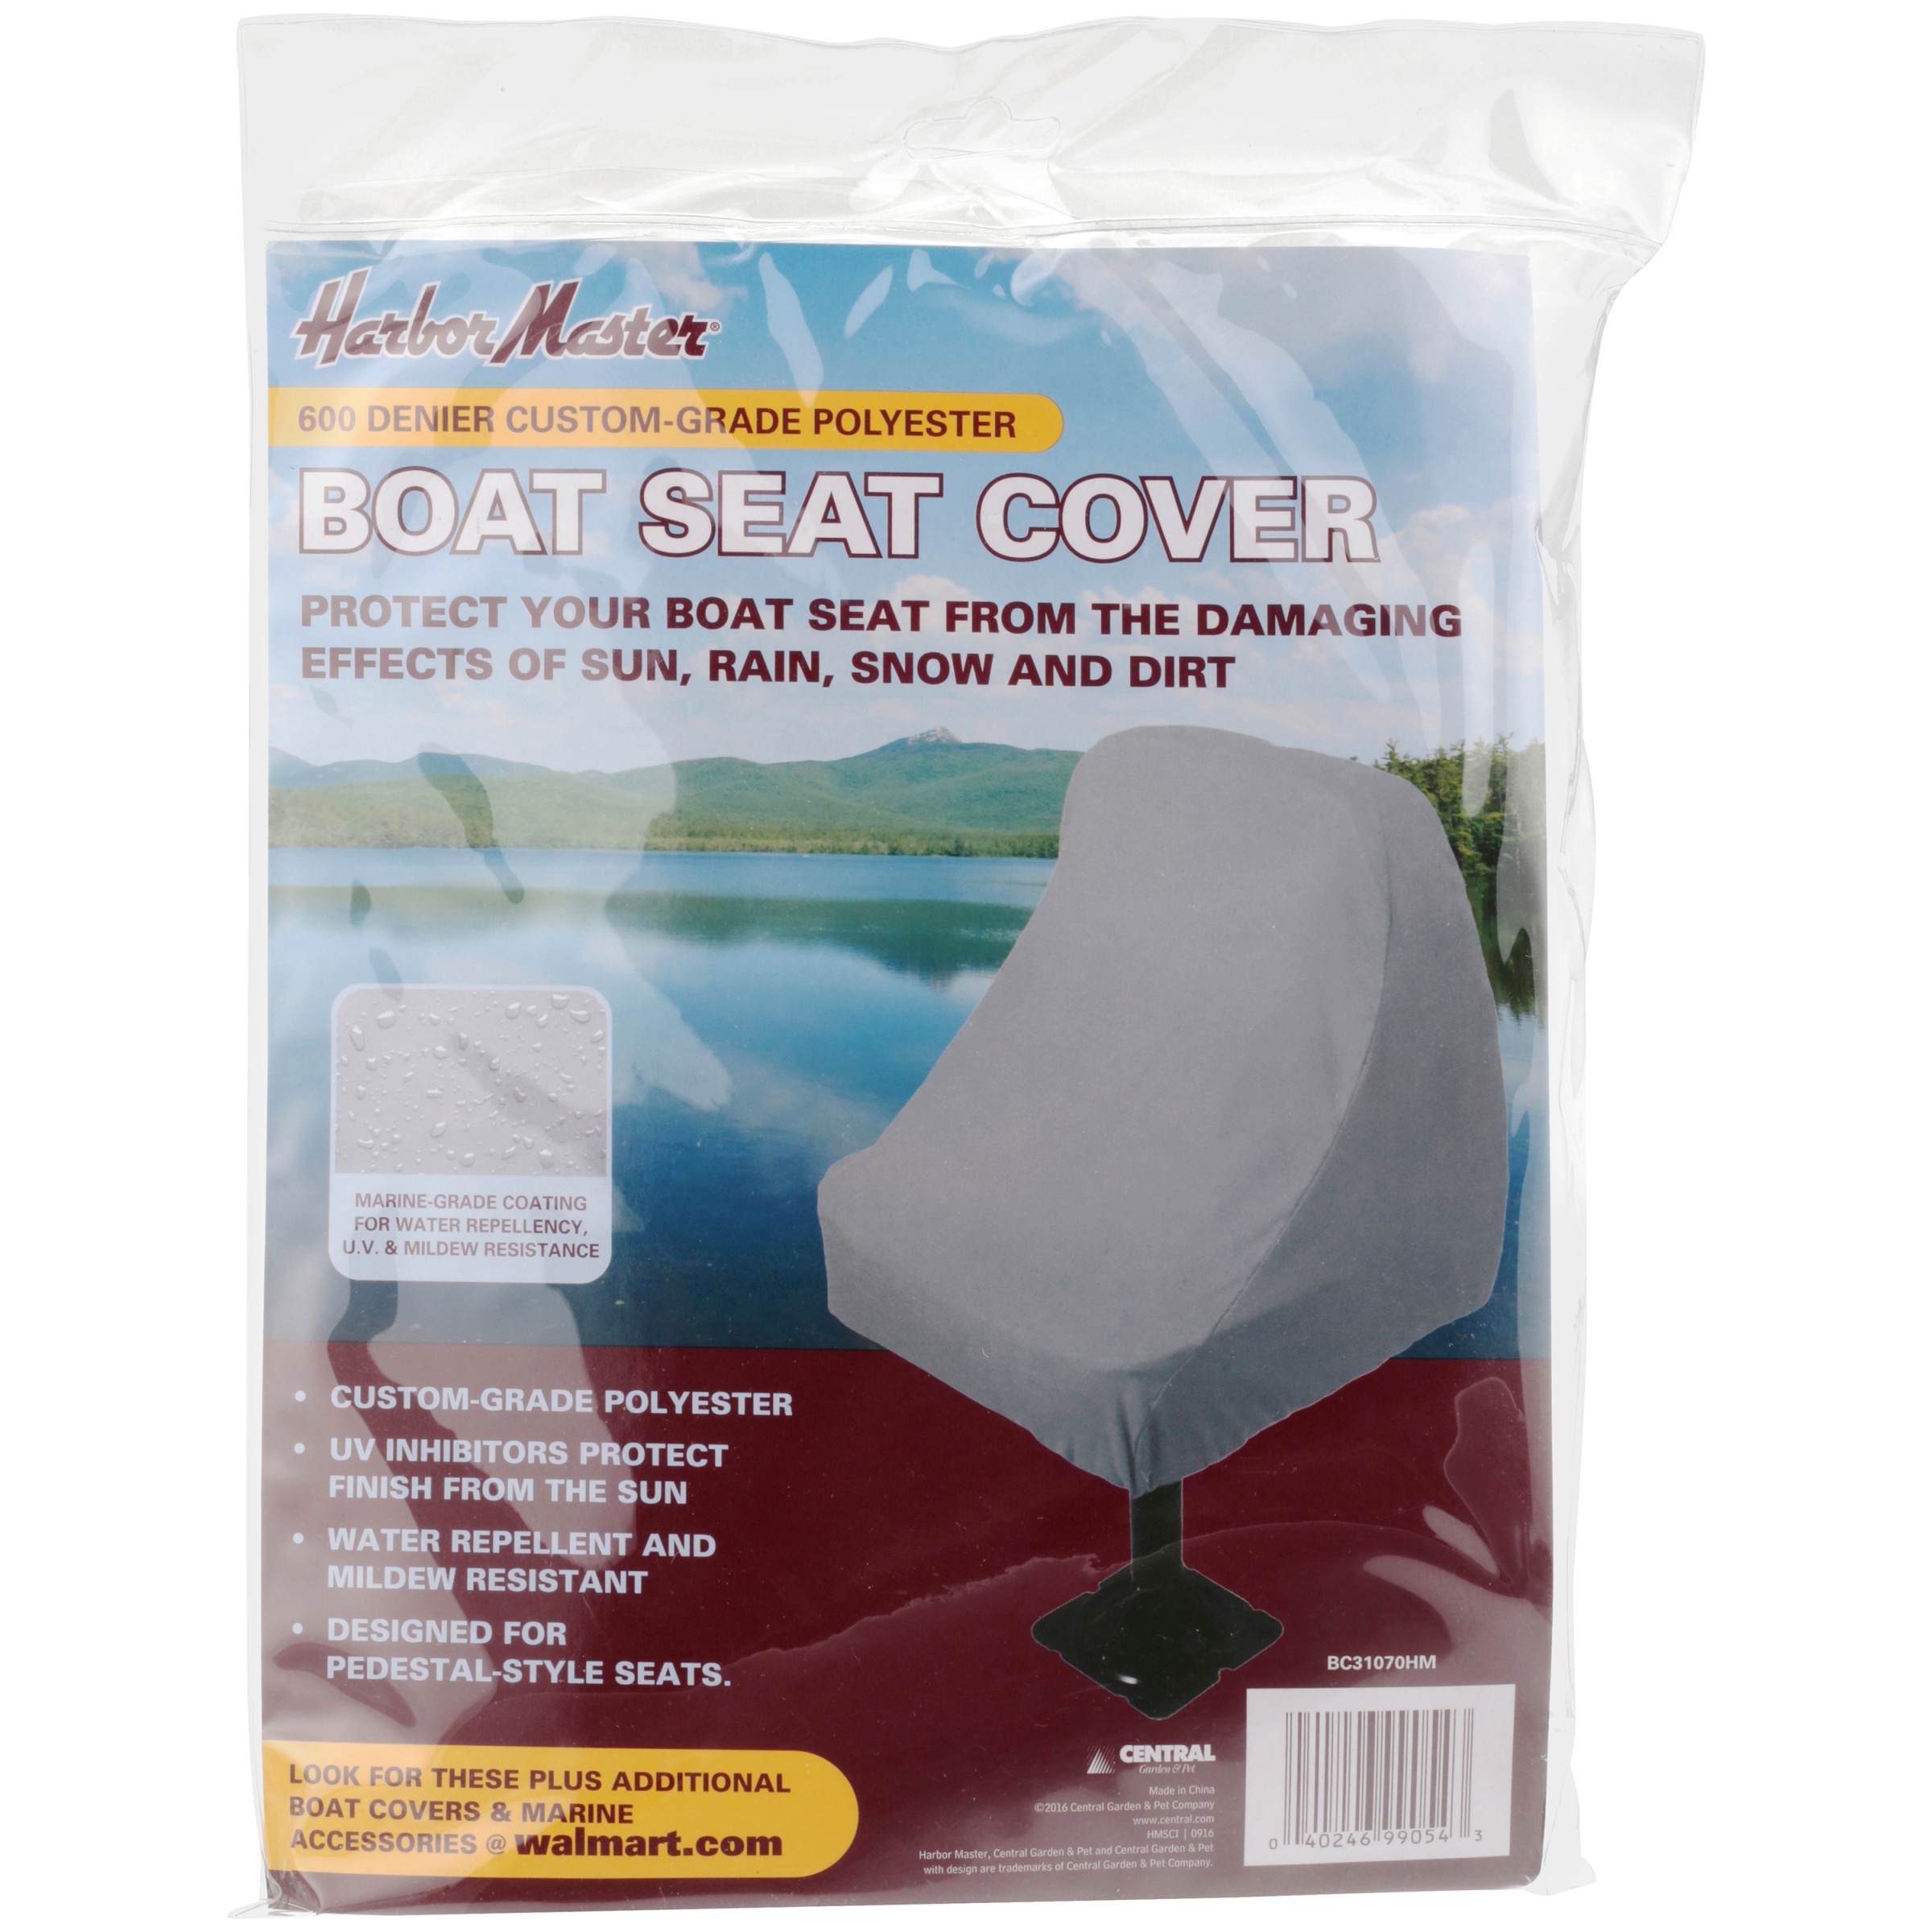 Harbor Master 600-Denier Polyester Seat Cover, Gray - image 2 of 4